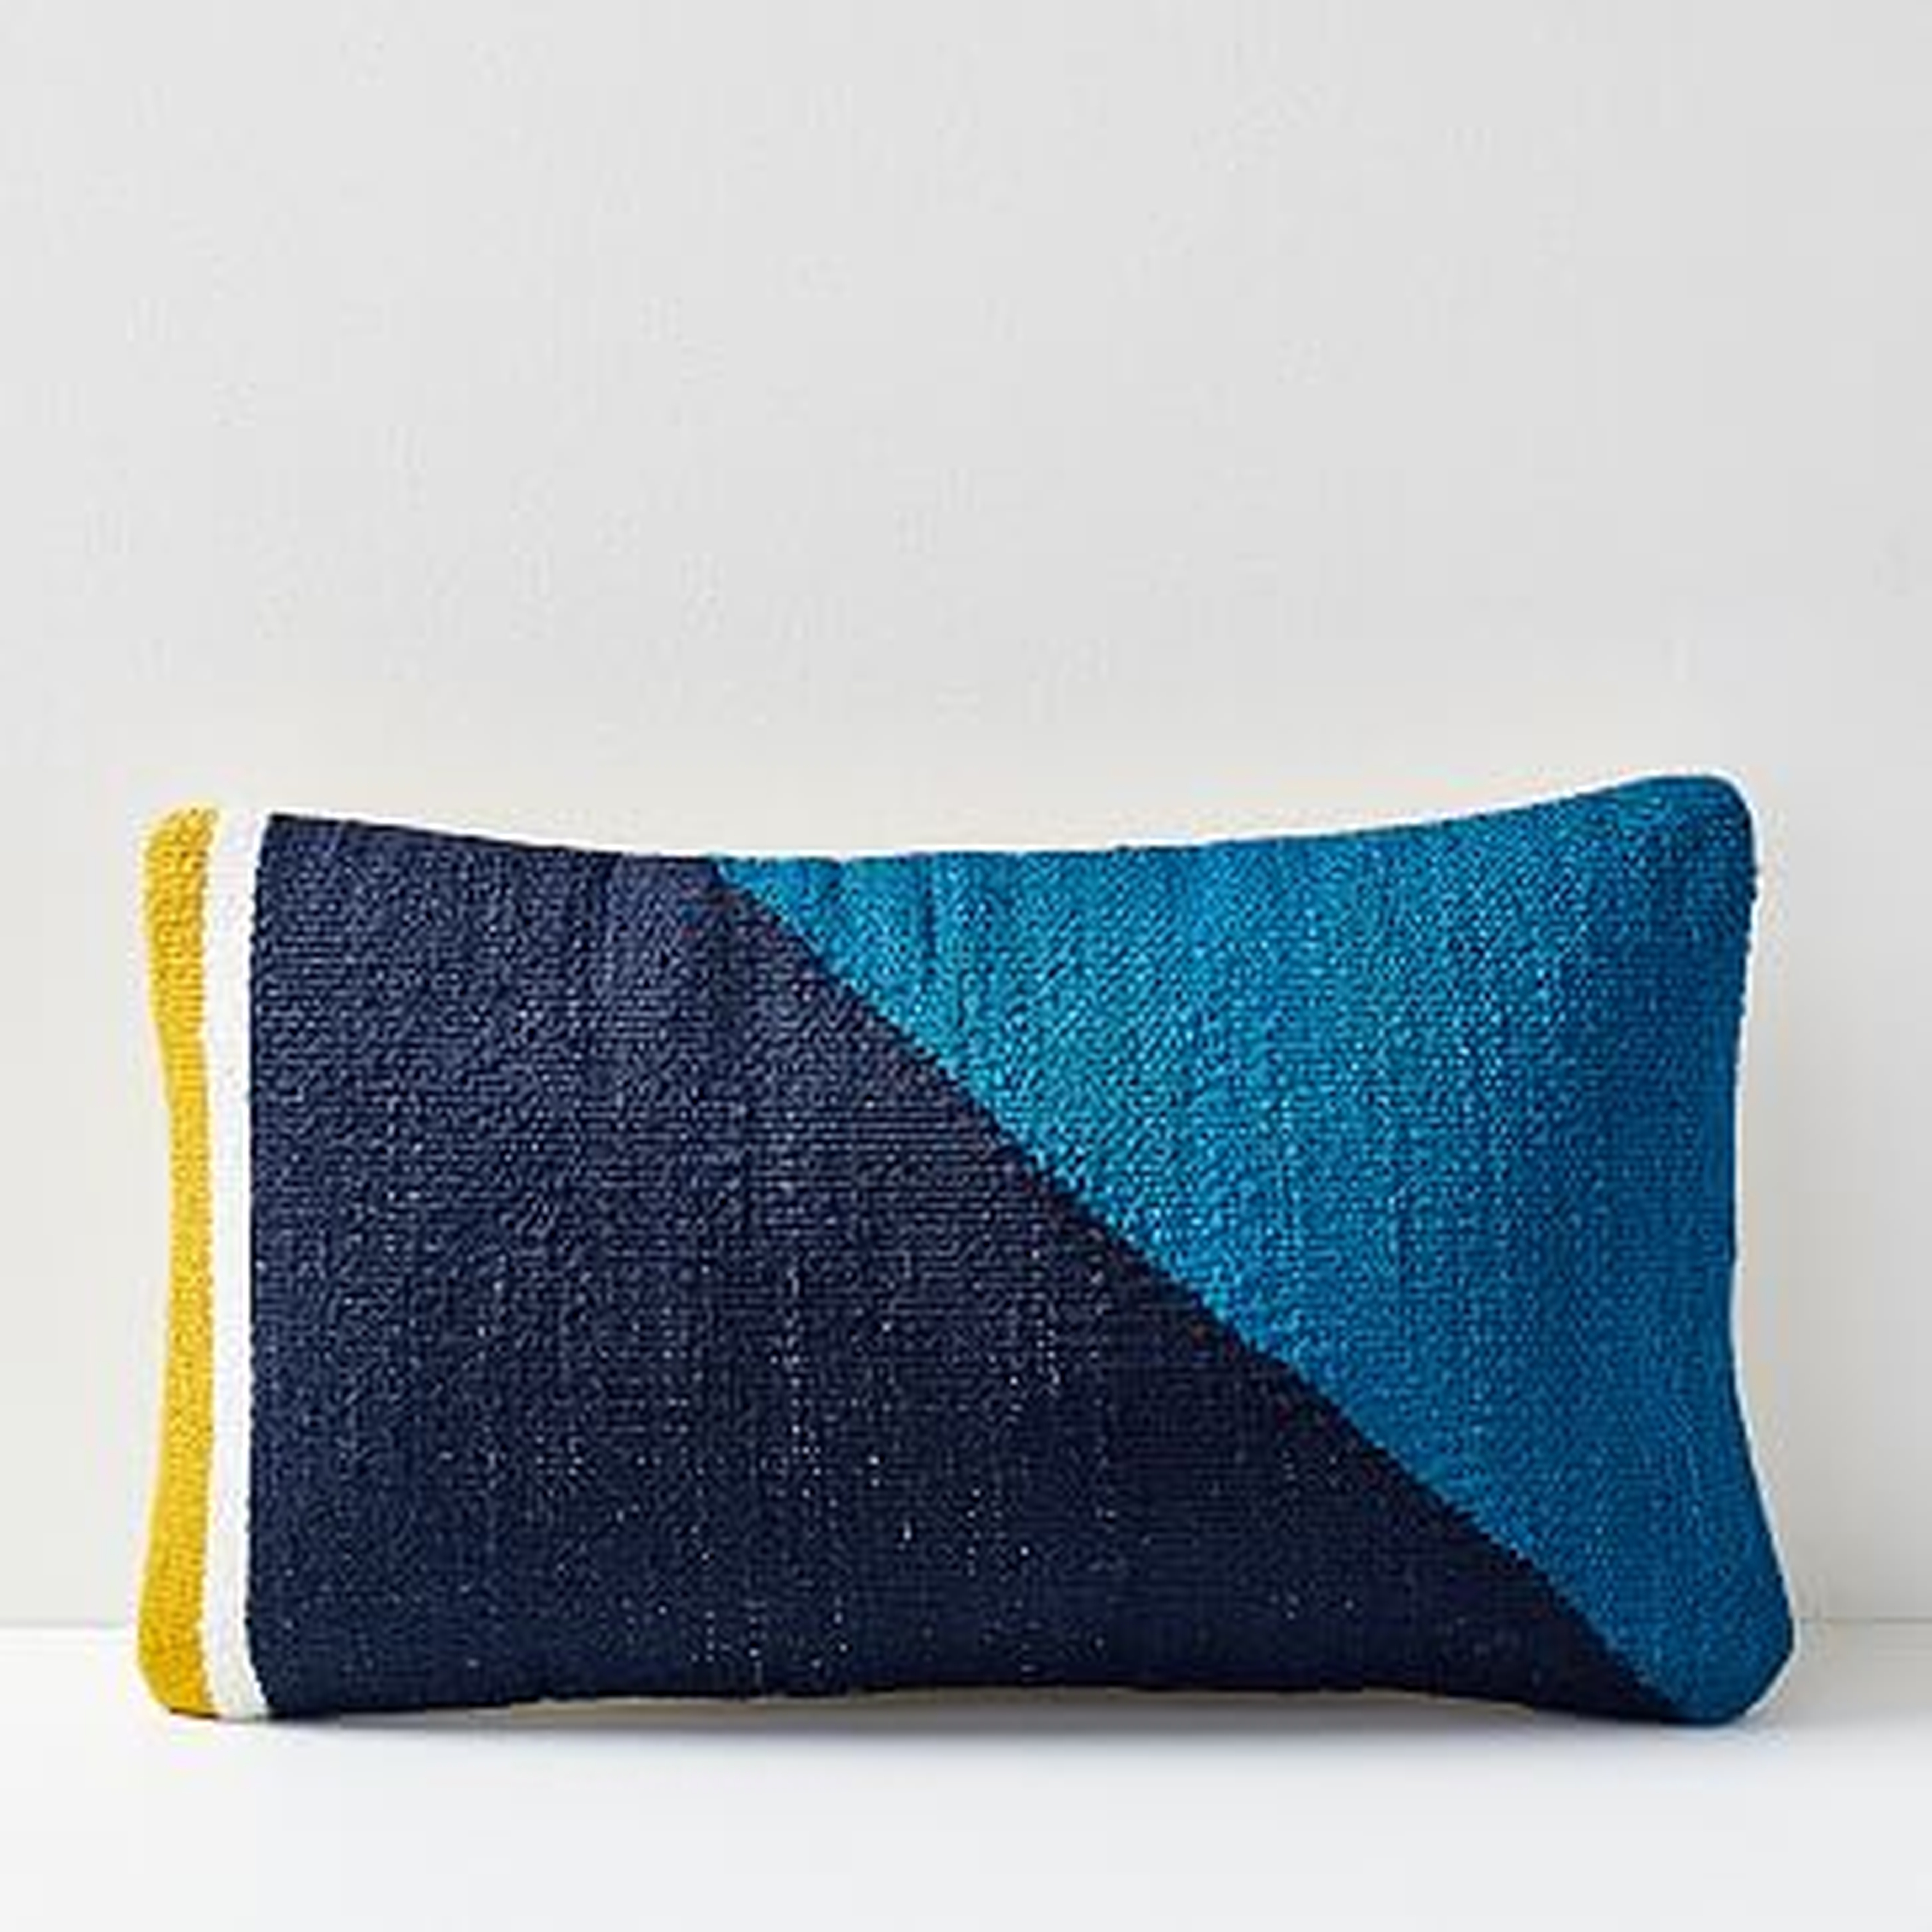 Spliced Colorfield Pillow Cover, Midnight - West Elm